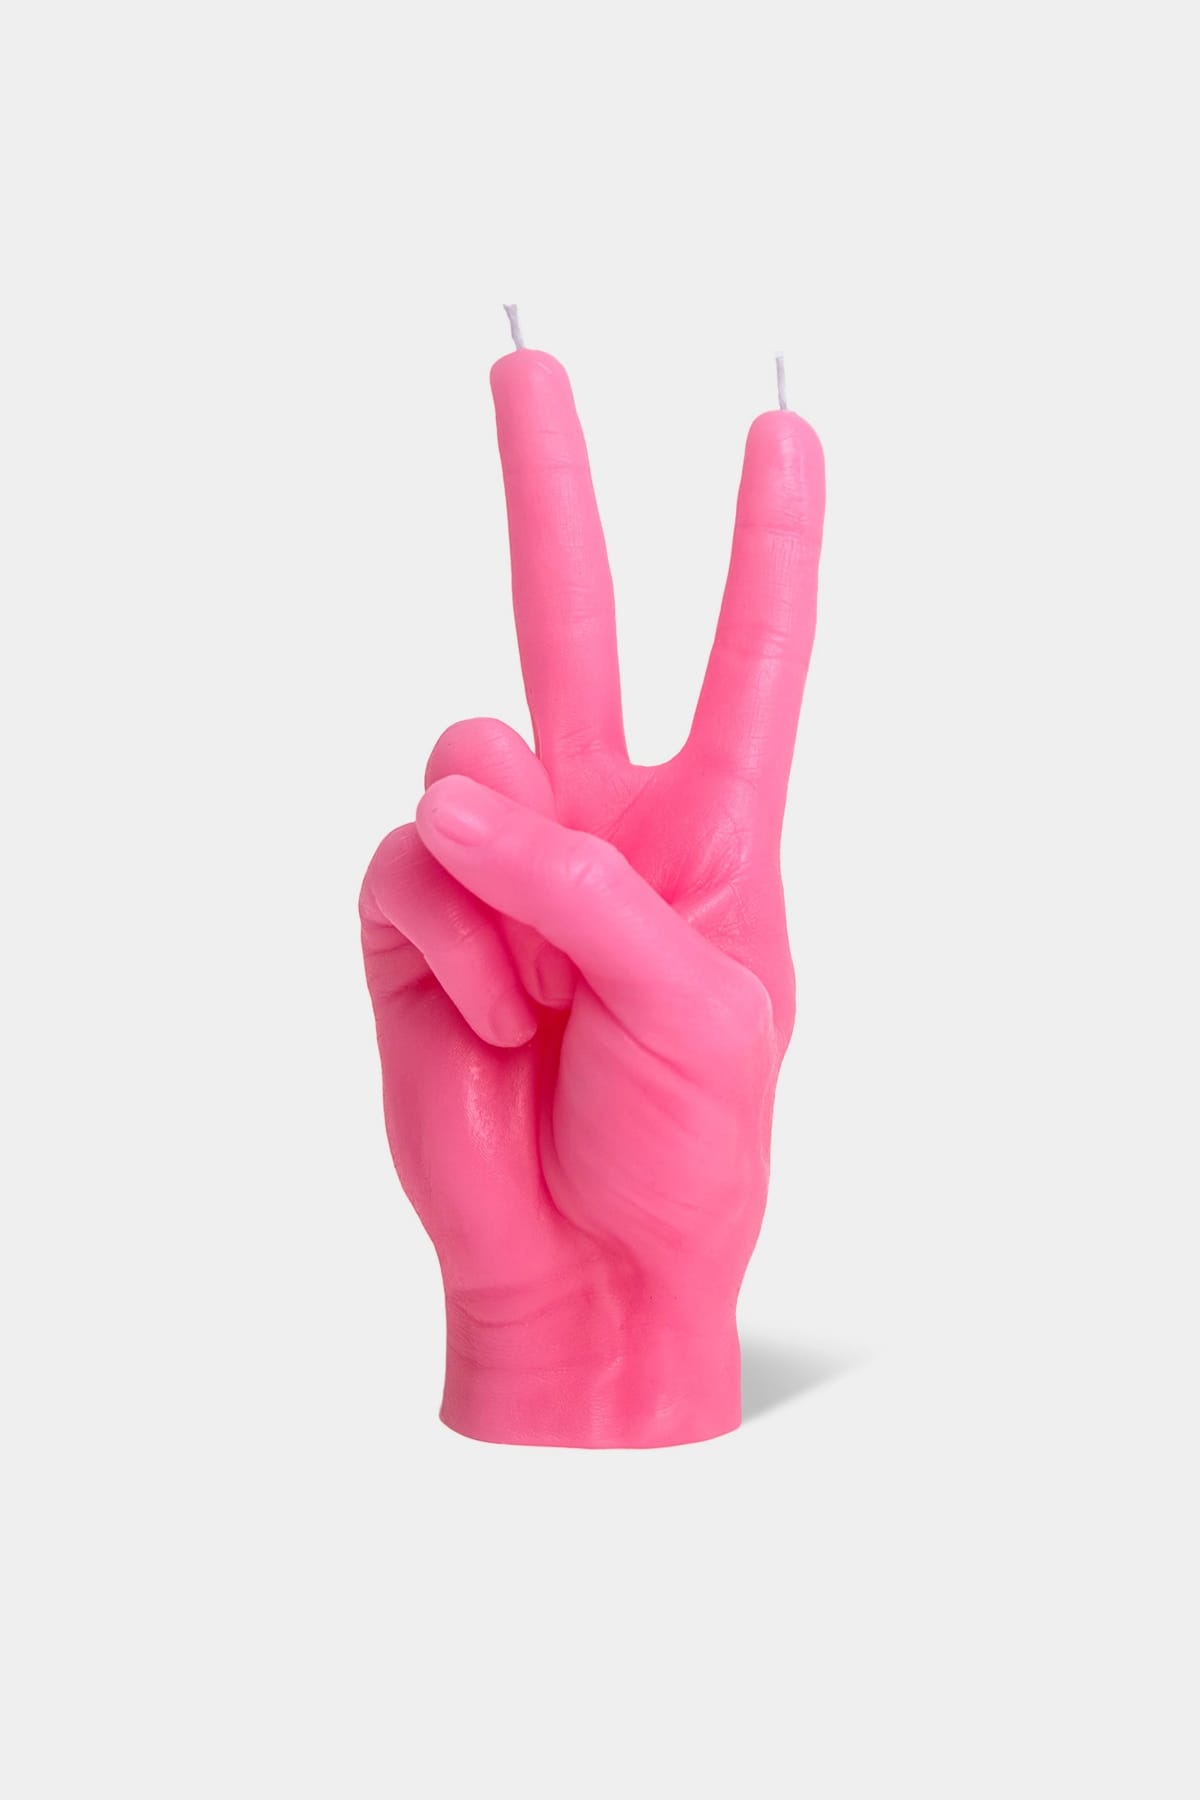 Victory/Peace Hand Gesture Candle (Pink) - Candle